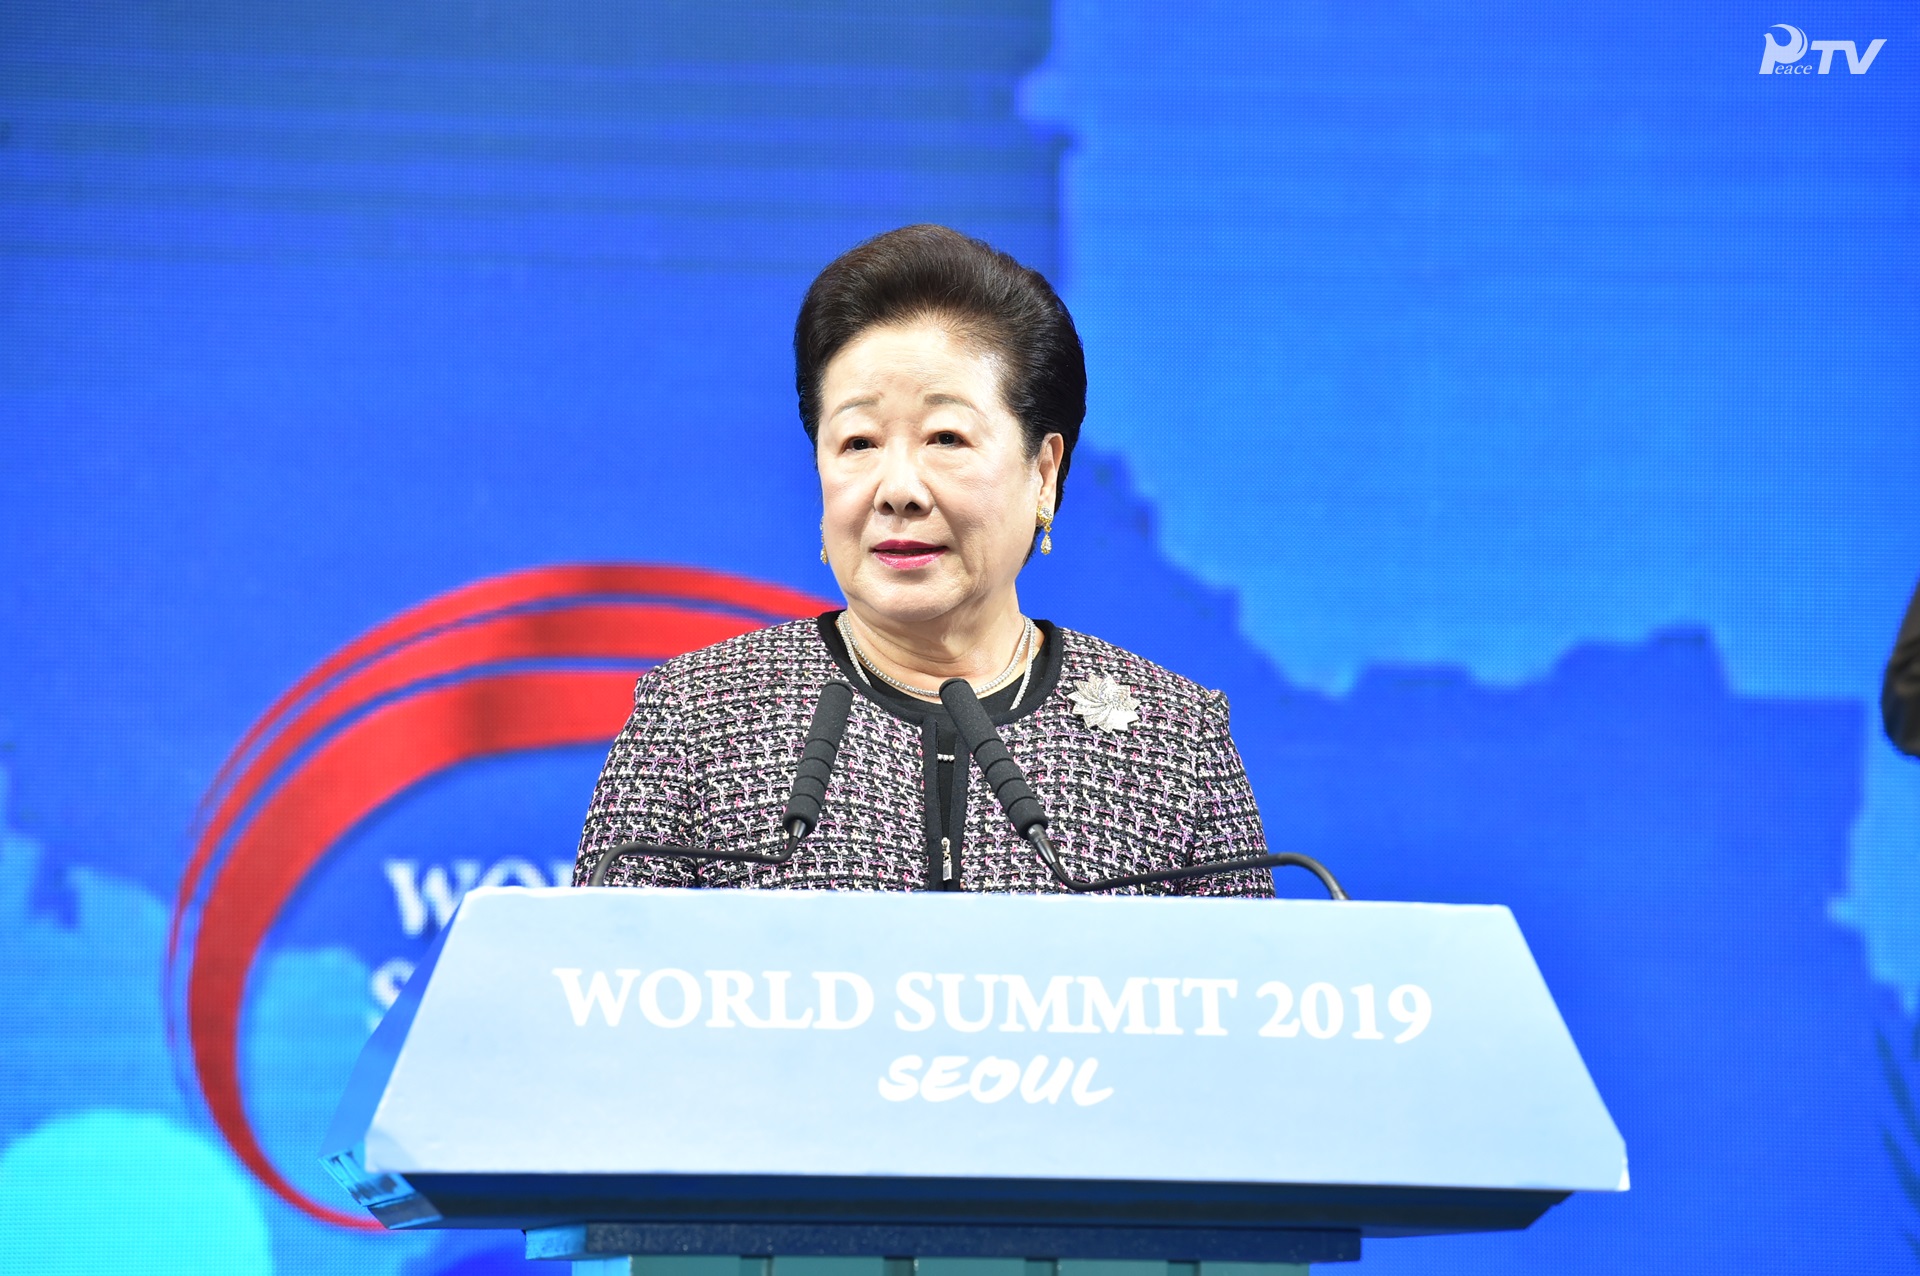 World Summit 2019 Launch of the International Peace Summit Council (February 8) the Lotte Hotel in Jamsil, Seoul